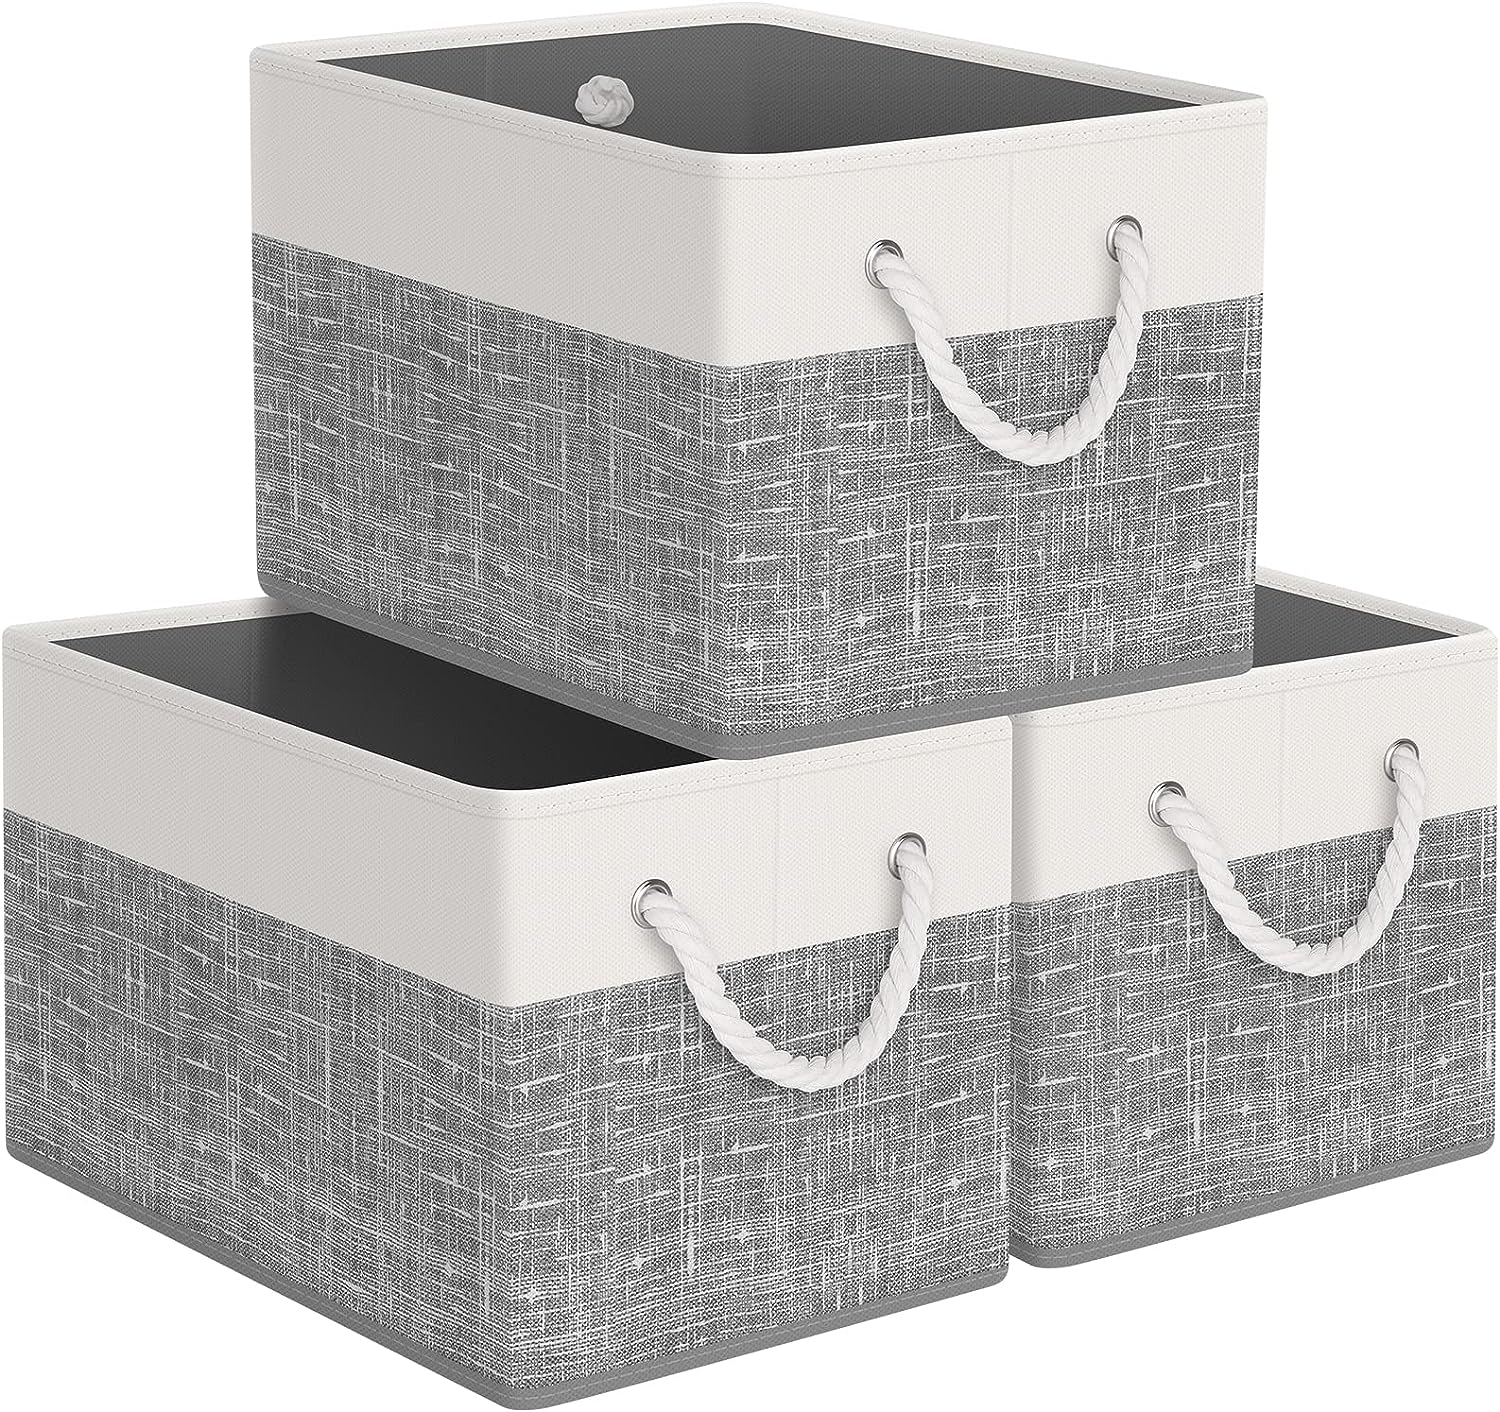 Blushbees® Collapsible Storage Baskets - White & Black, Pack of 3